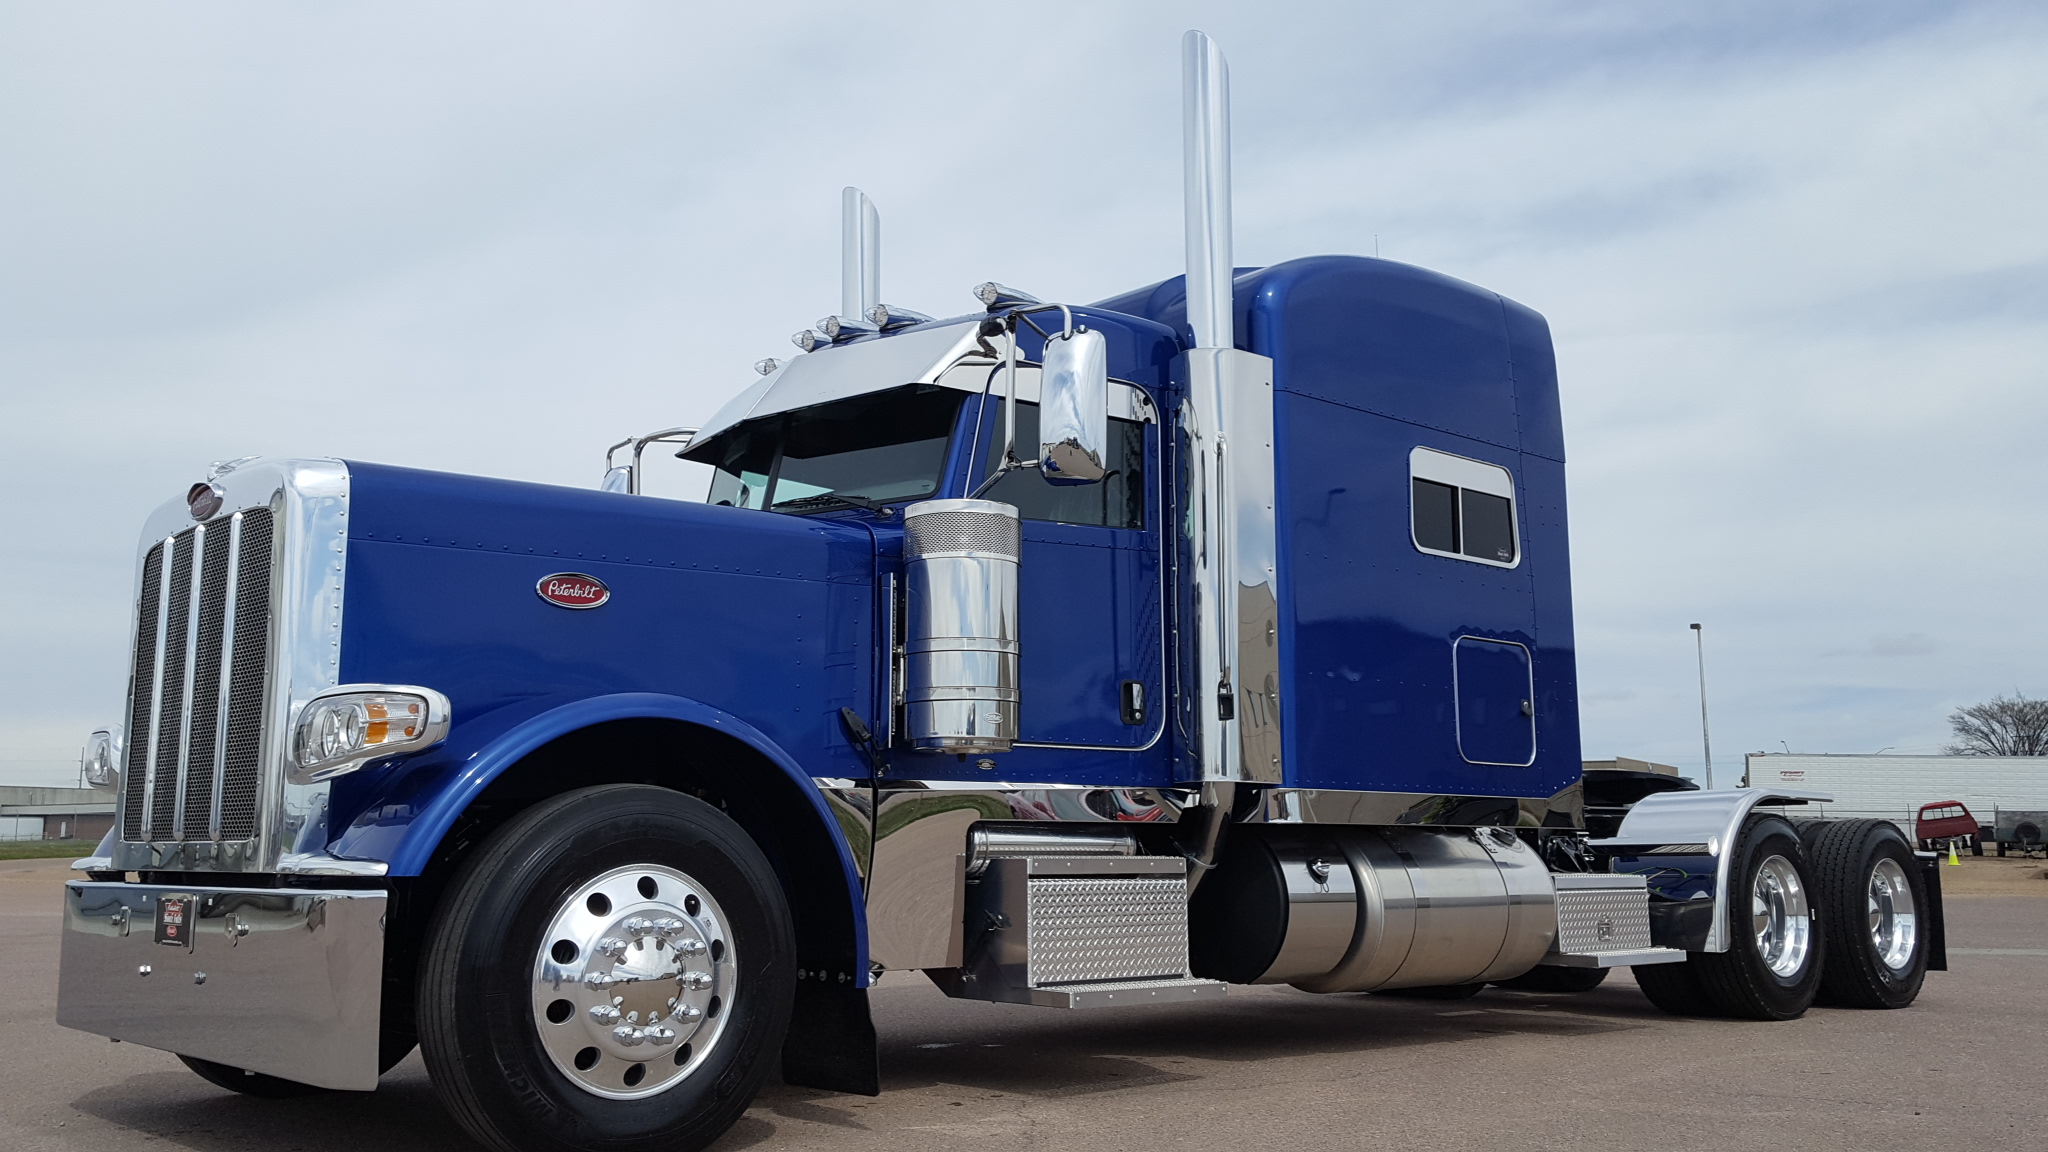 New 2018 custom 389 for sale! - Peterbilt of Sioux Falls